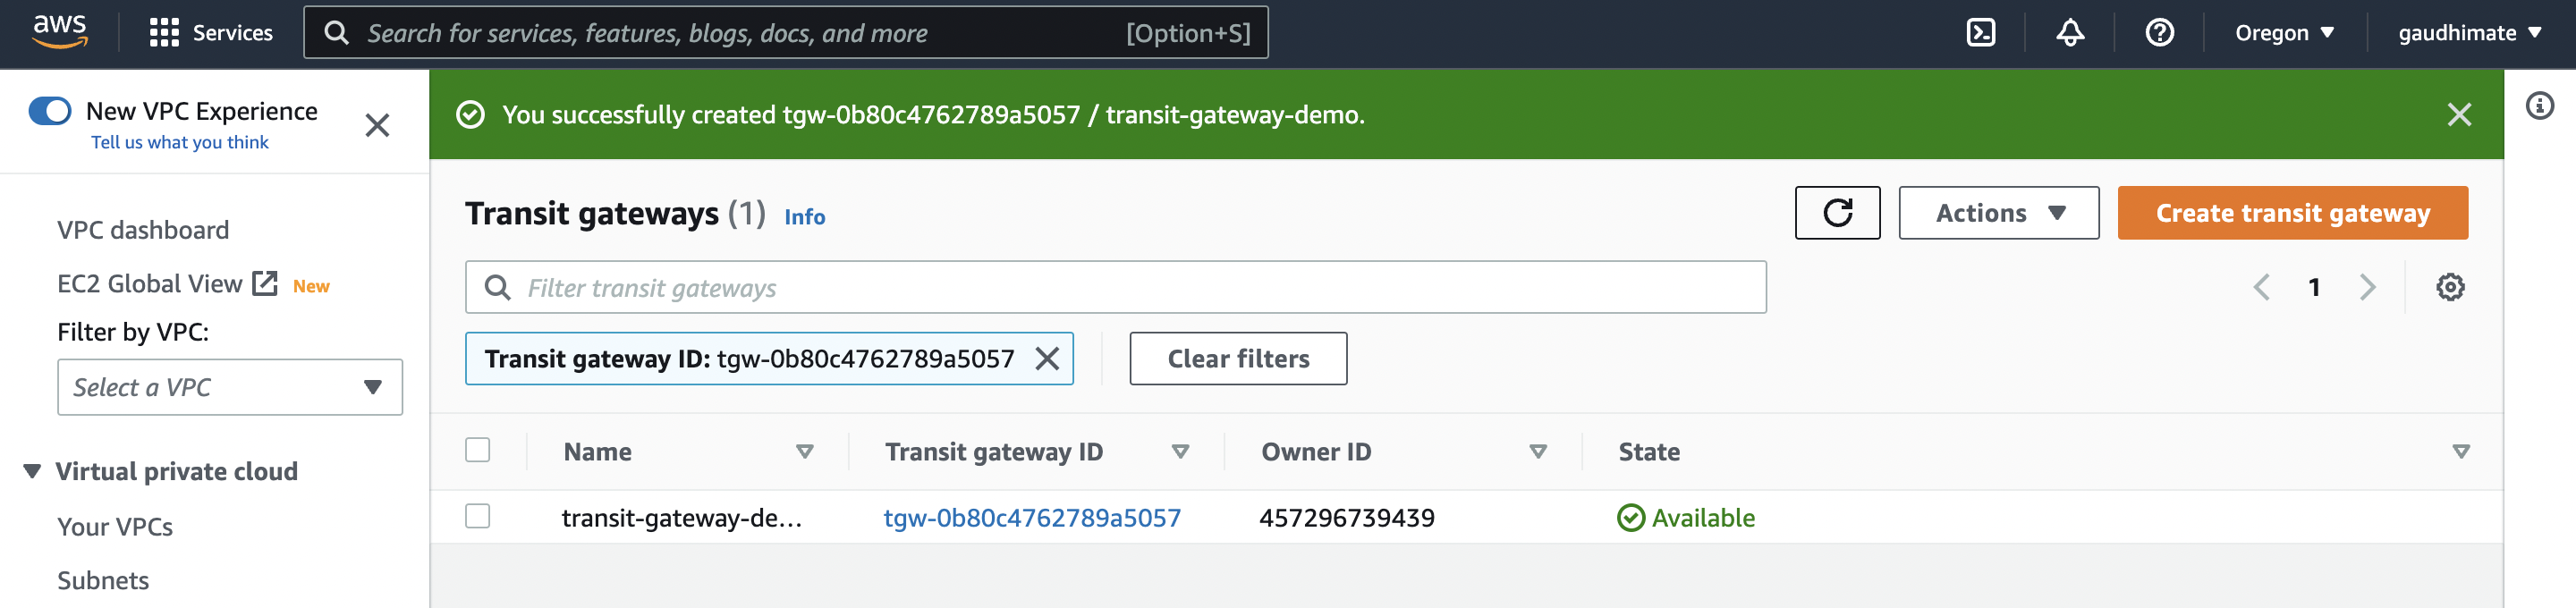 Once Transit Gateway is available for use it will be in "Available" status.